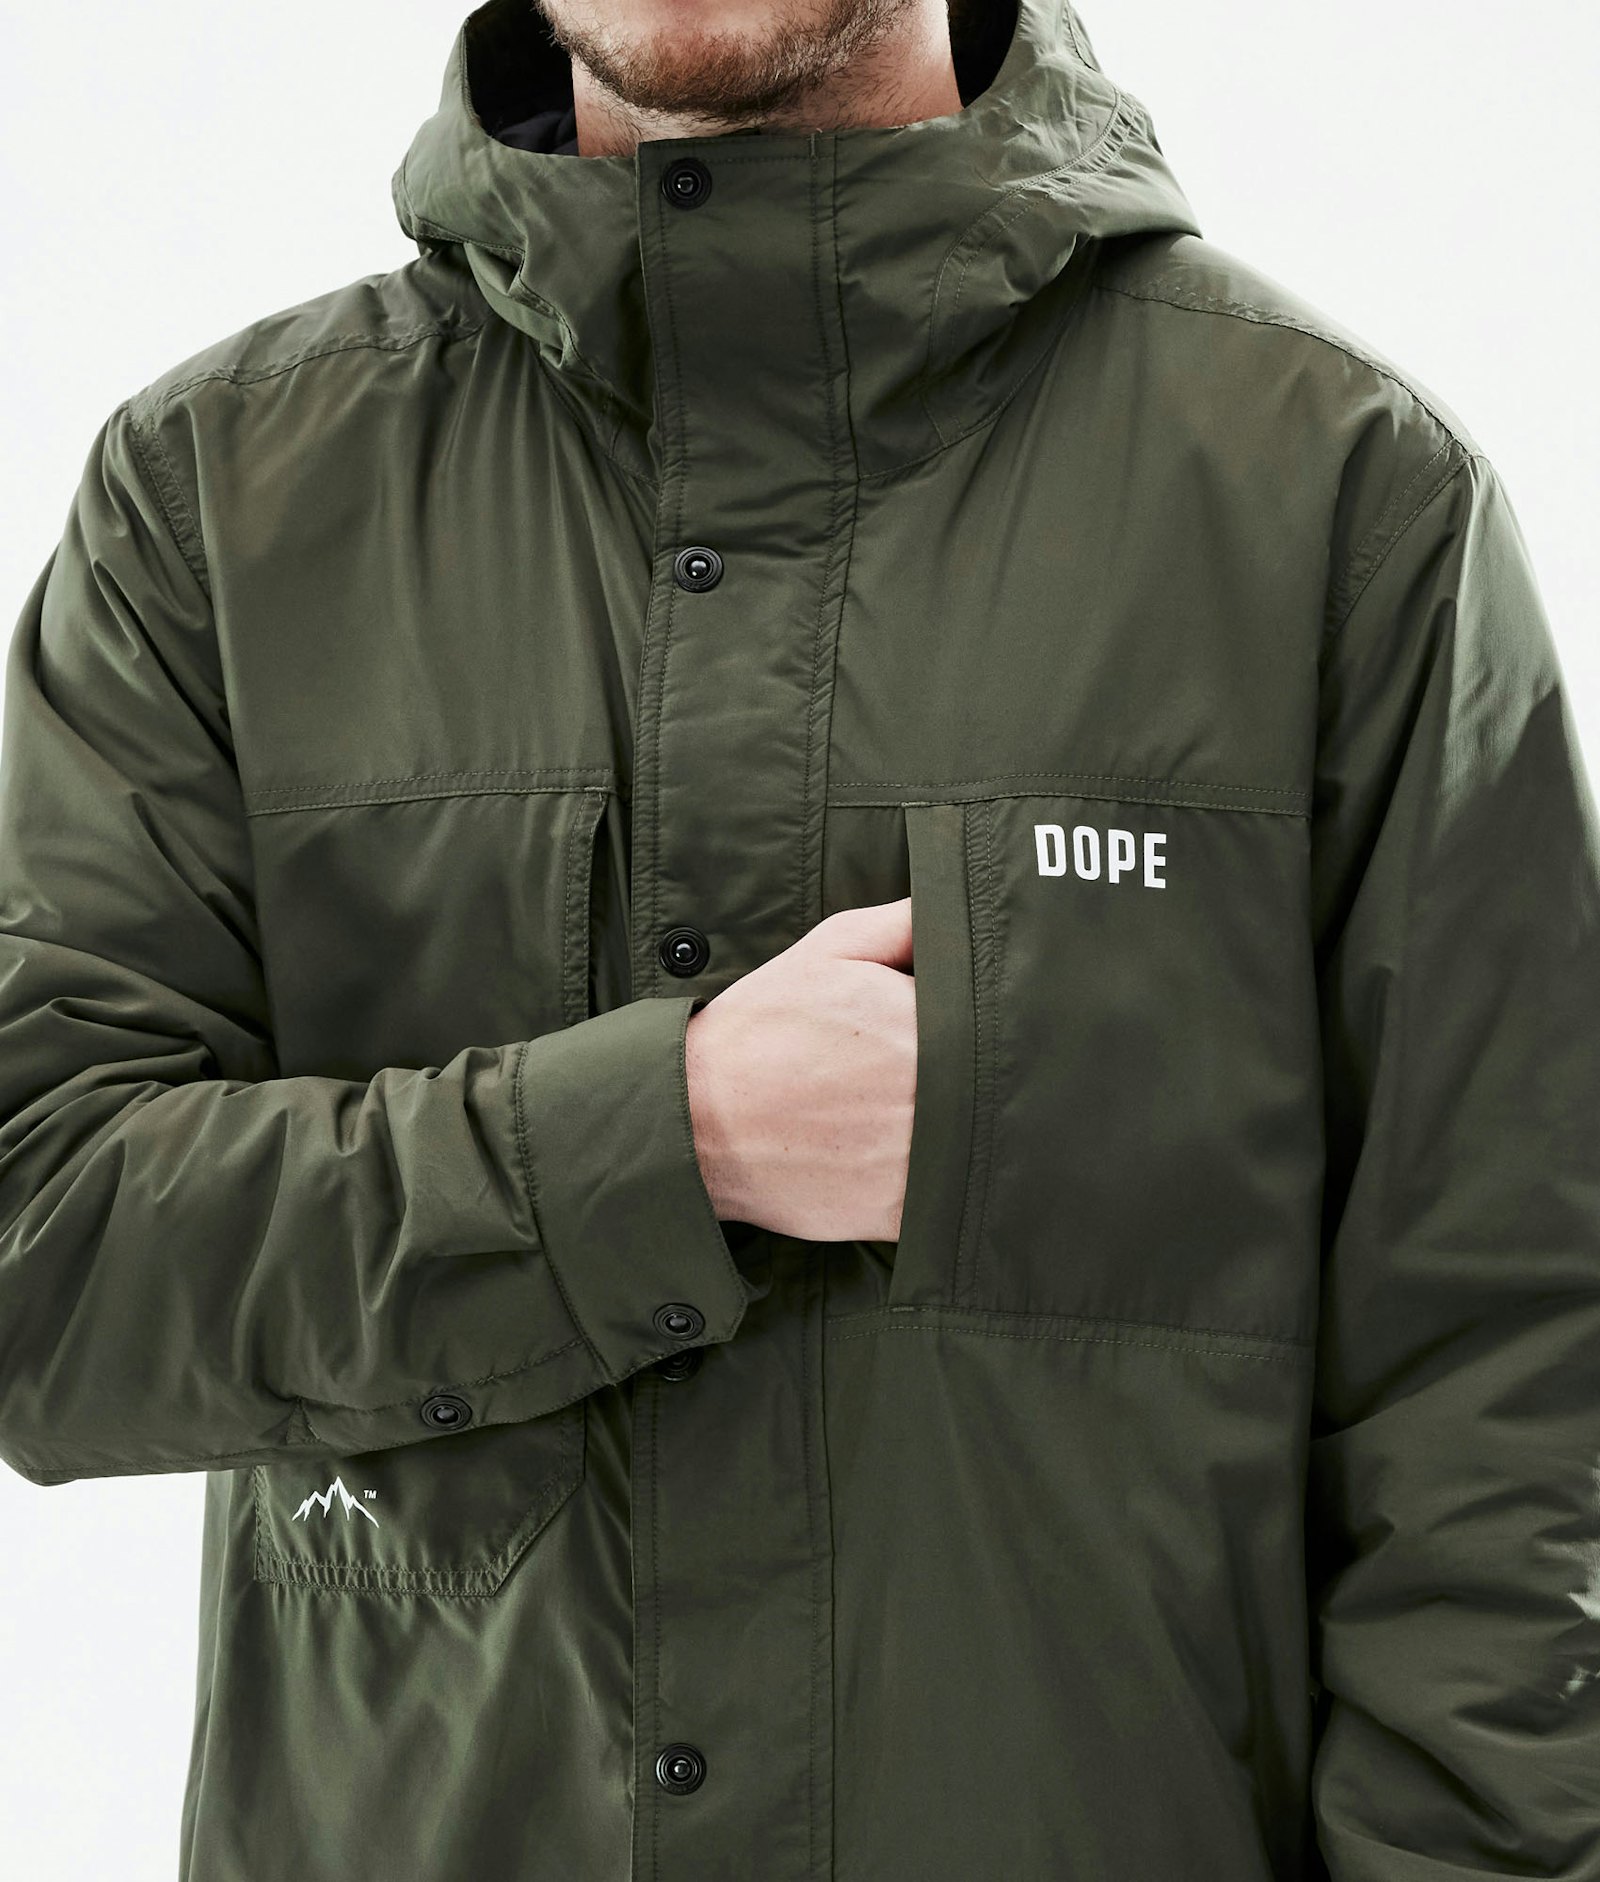 Dope Insulated Veste - Couche intermédiaire Homme Olive Green Renewed, Image 10 sur 12